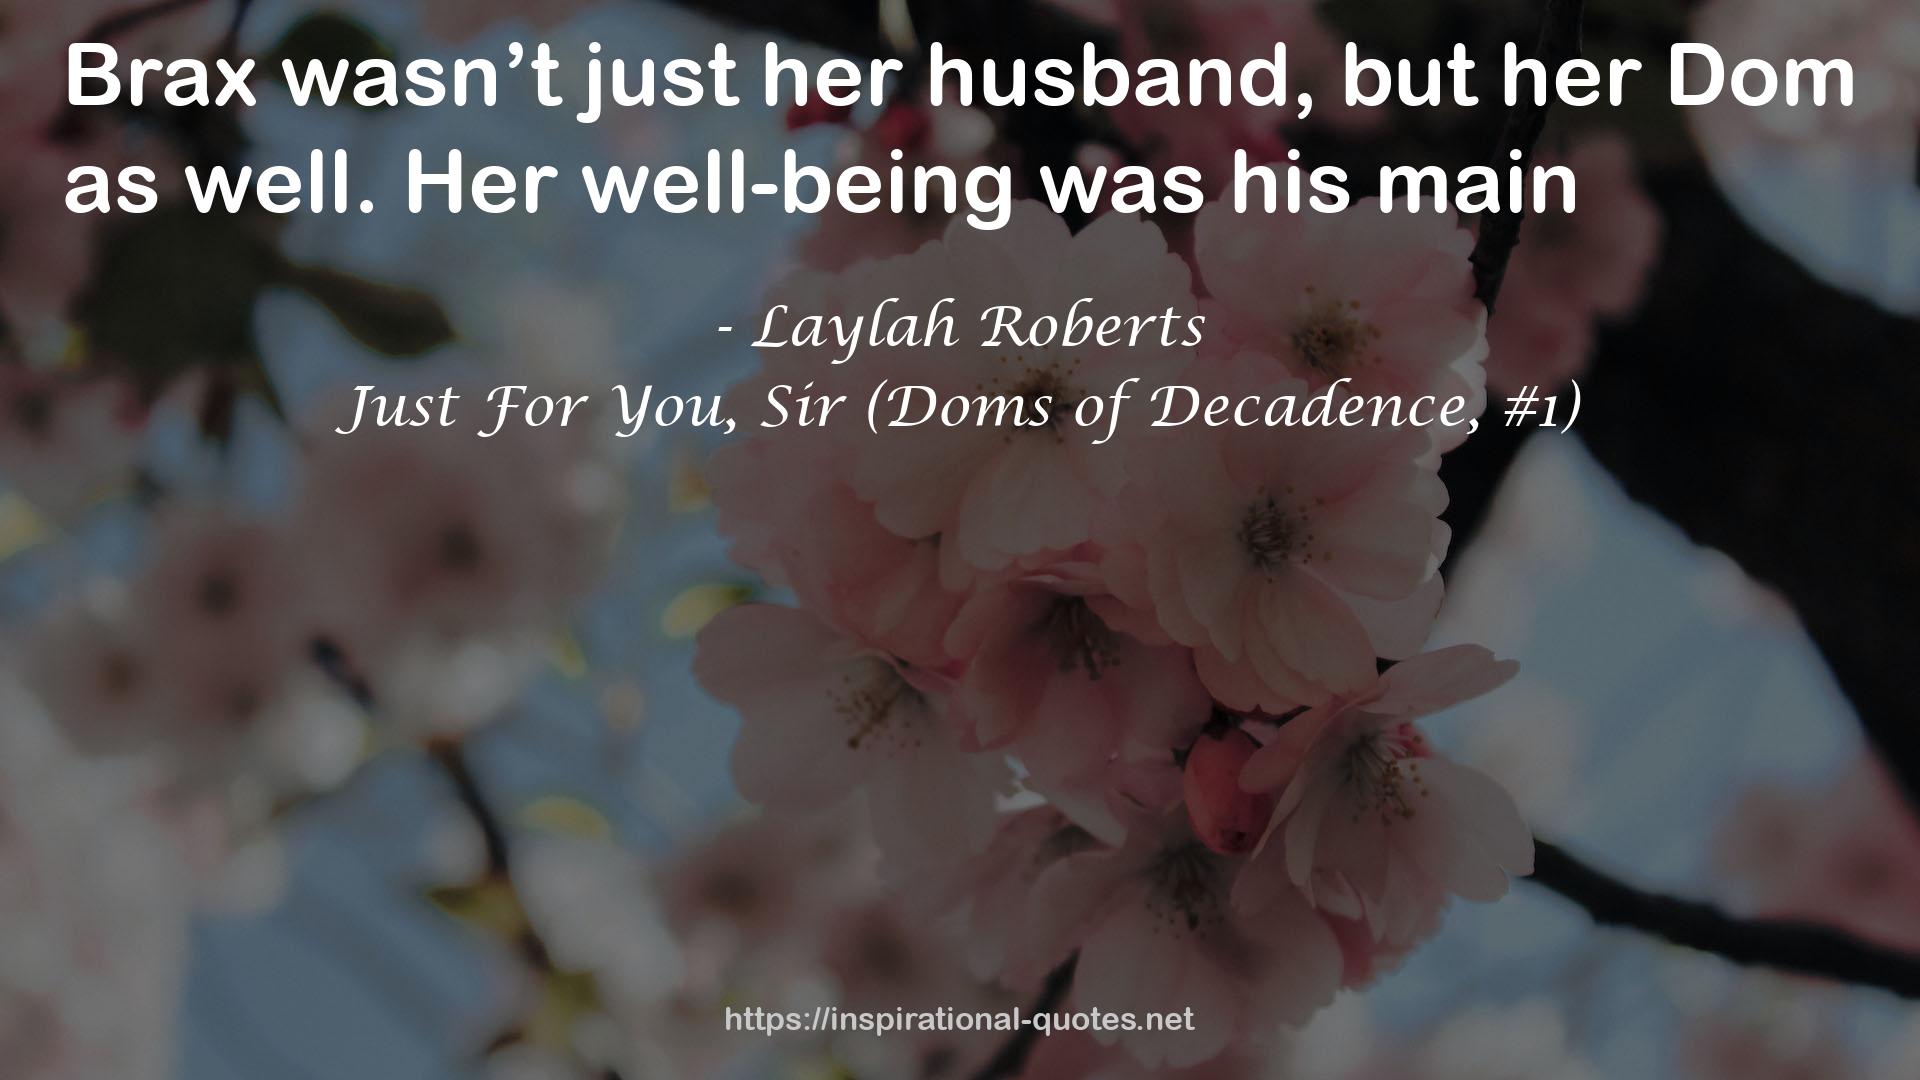 Just For You, Sir (Doms of Decadence, #1) QUOTES